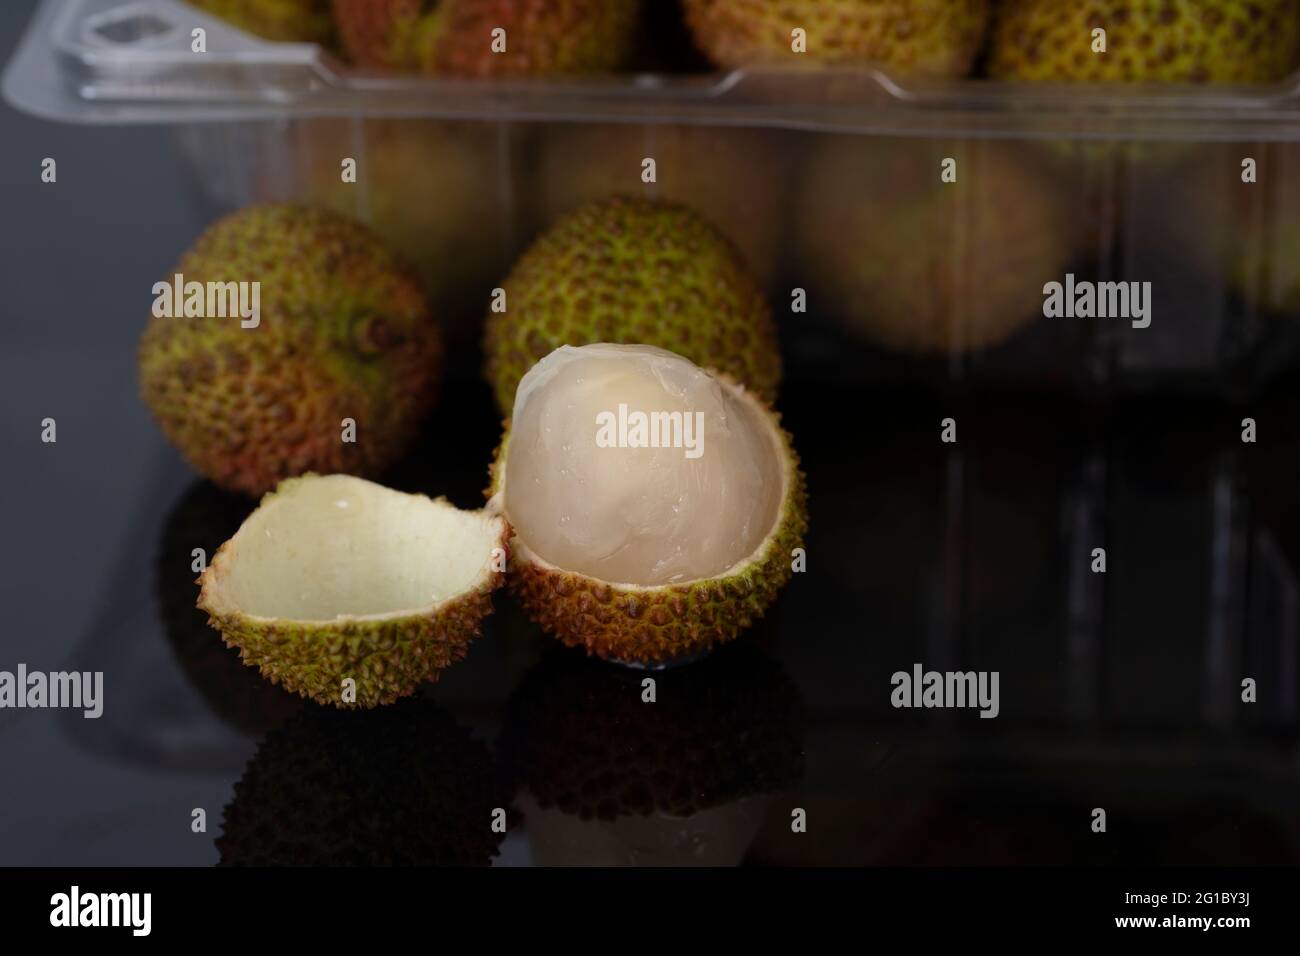 A close-up of a peeled green lychees with blurred whole fruit in the background. Selective focus points. Stock Photo